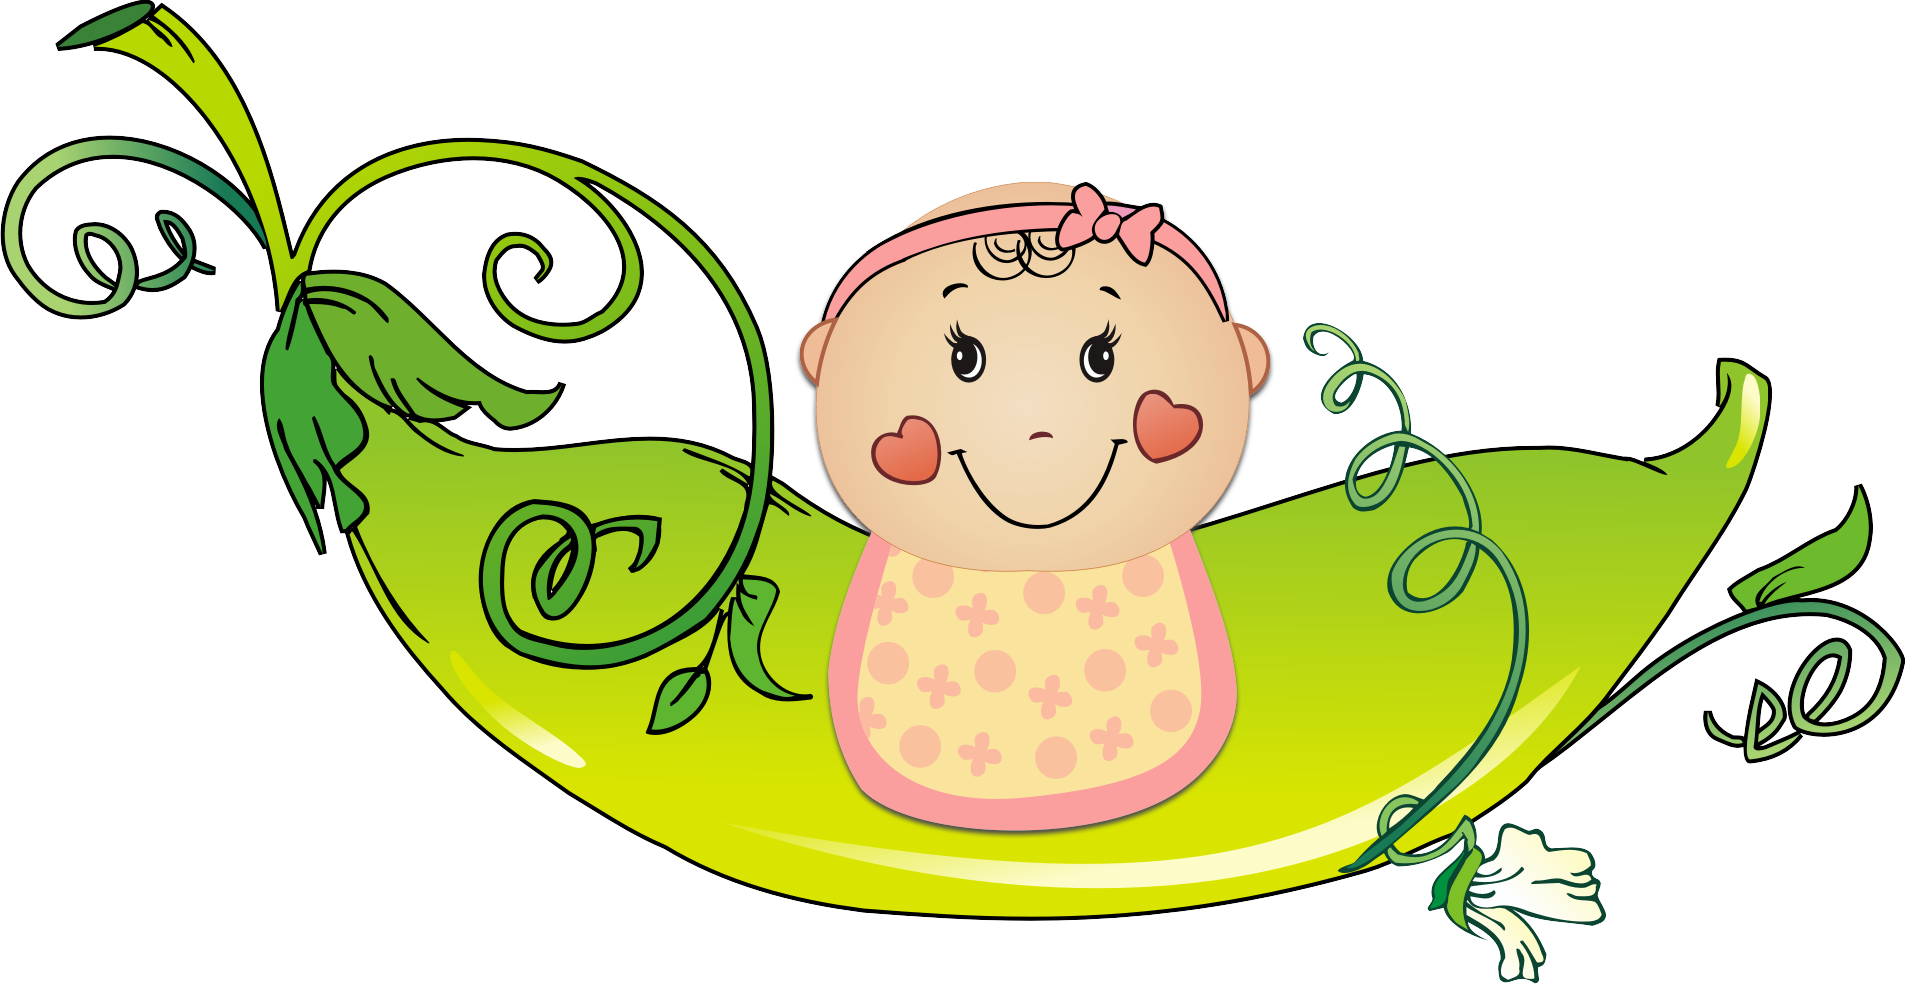 Baby Girl Clip Art Images - ClipArt Best